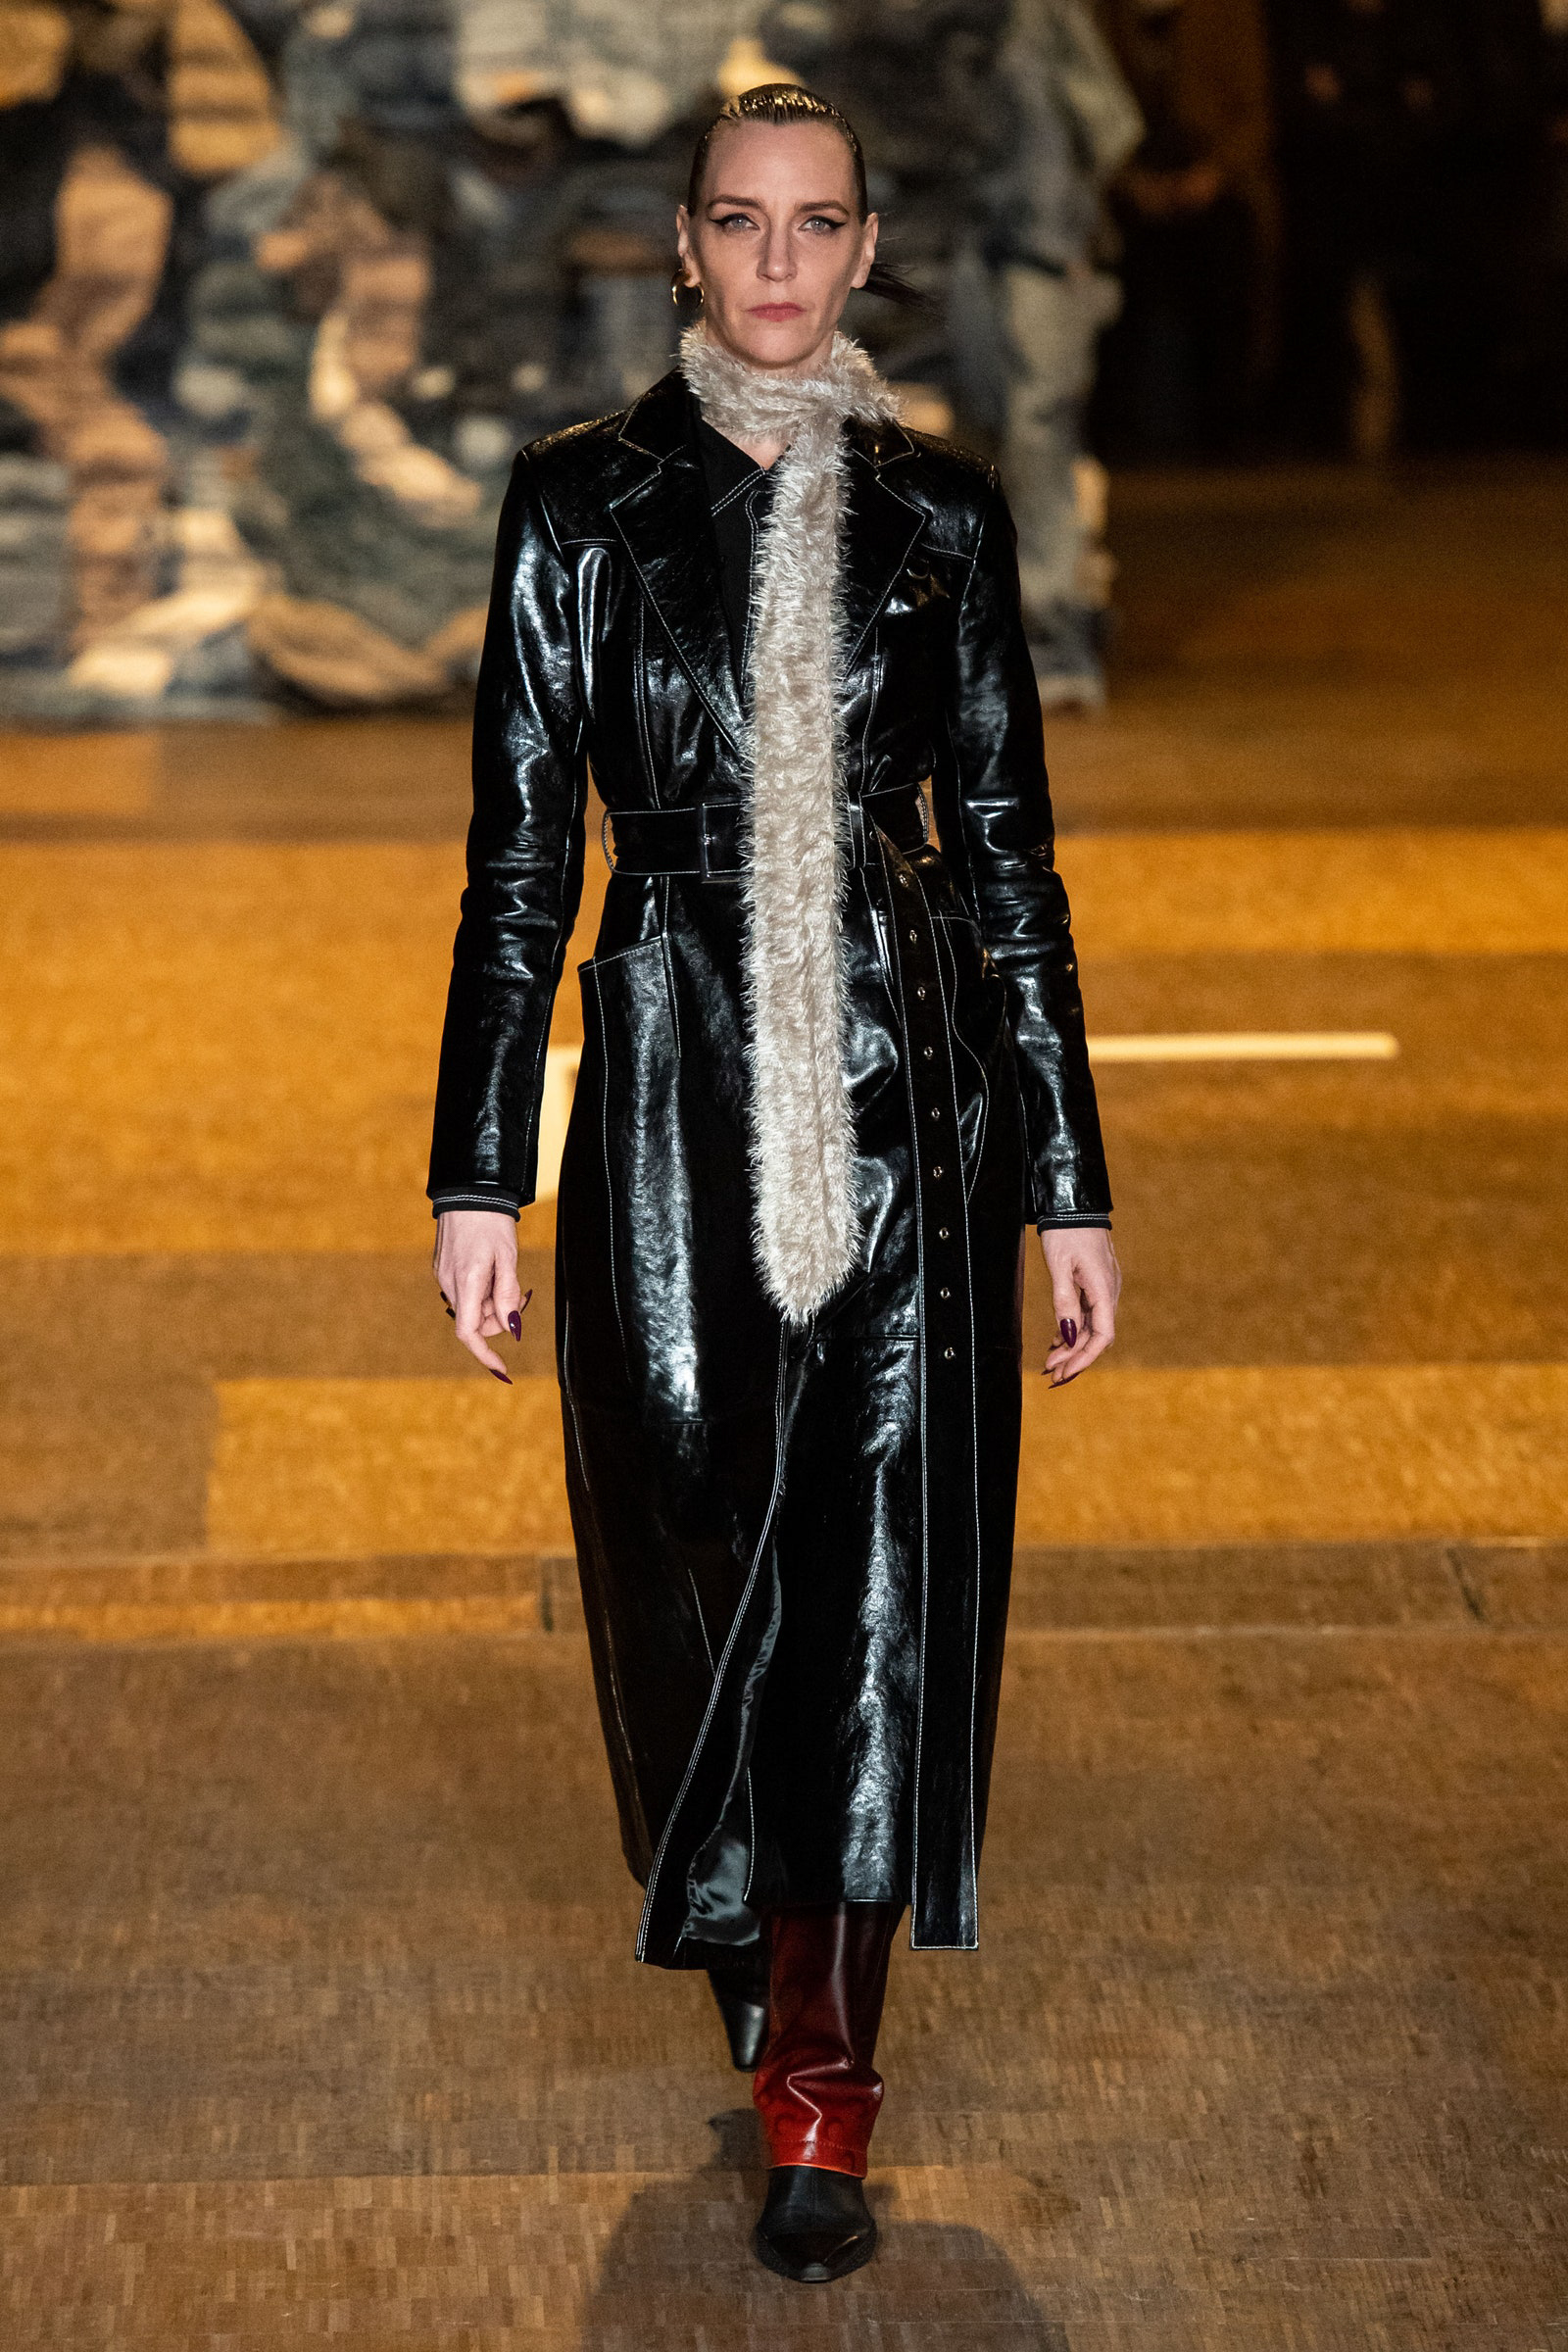 Hannelore Knuts is a regular on Marine Serre’s runway and even walked with her son during the fall 2020 show.